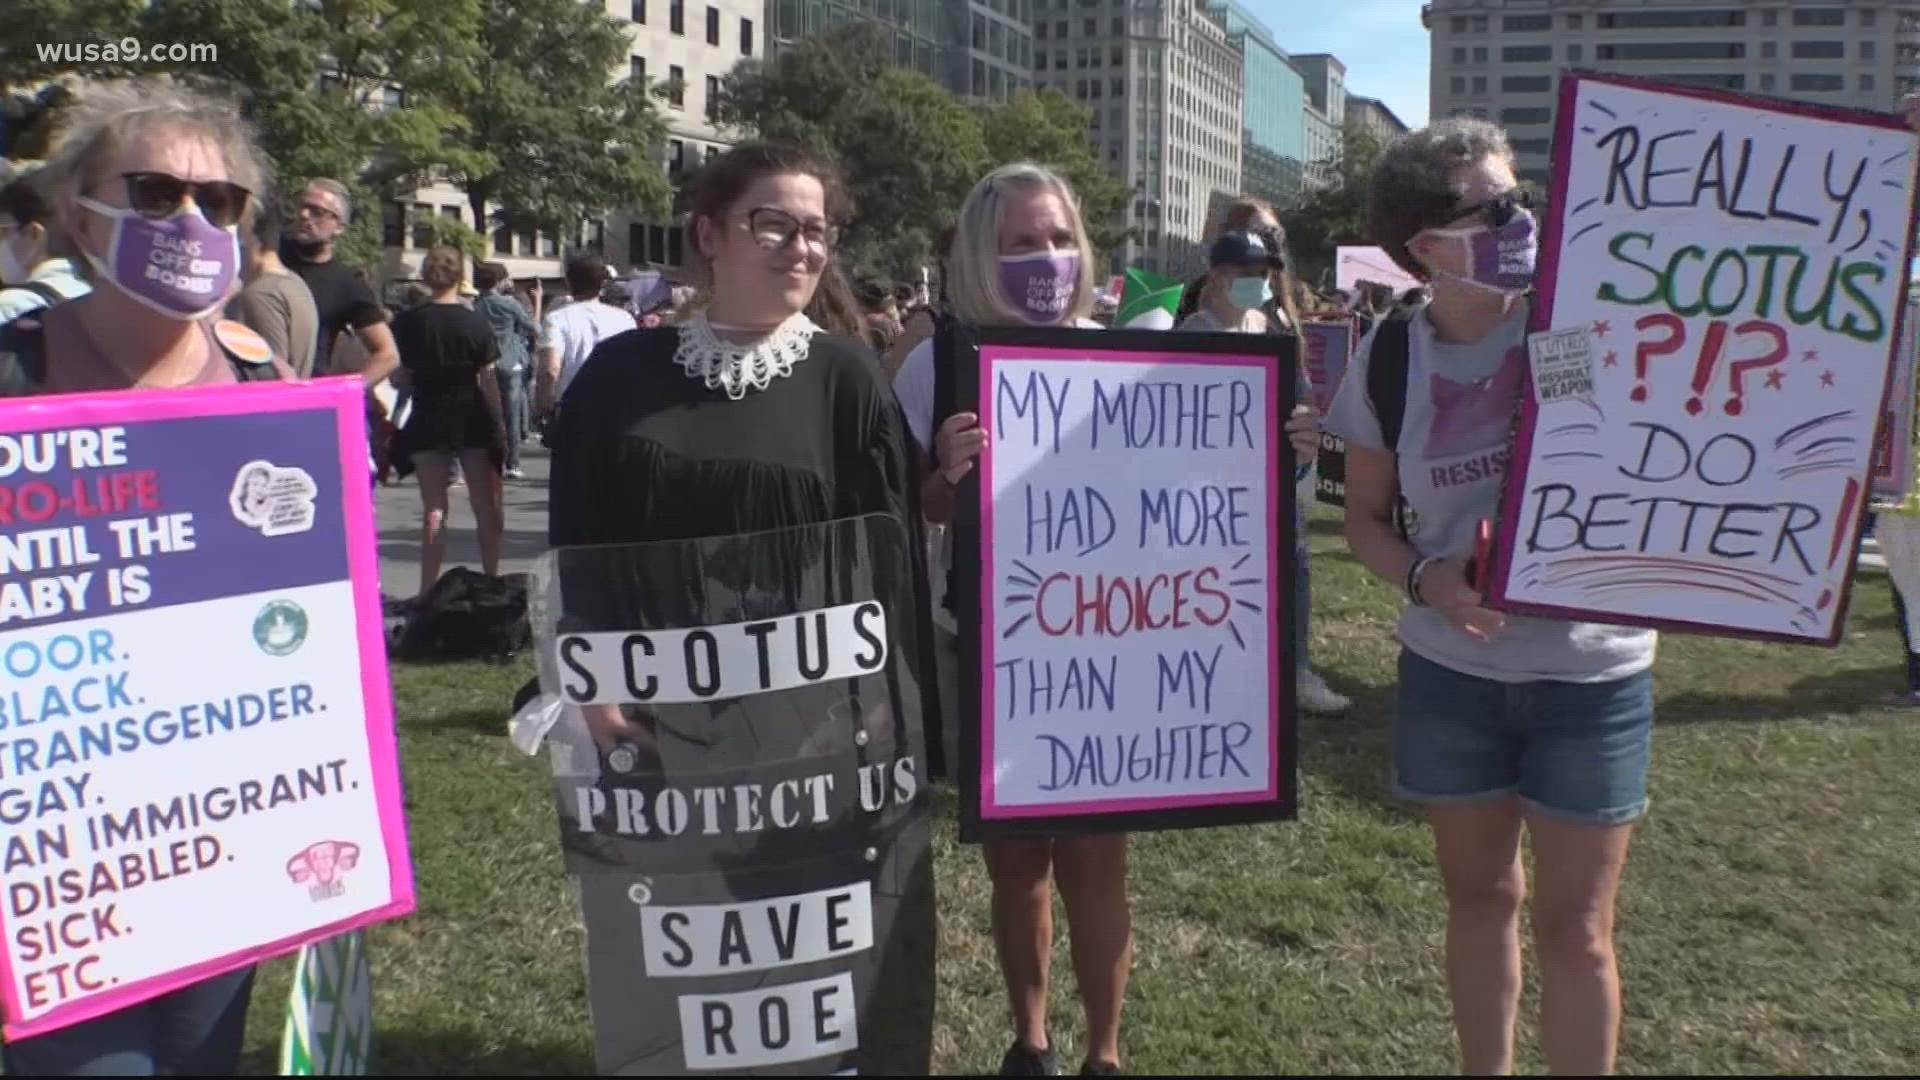 On Saturday, thousands of supporters for reproductive freedom held signs, chanted, and marched to the Supreme Court building.